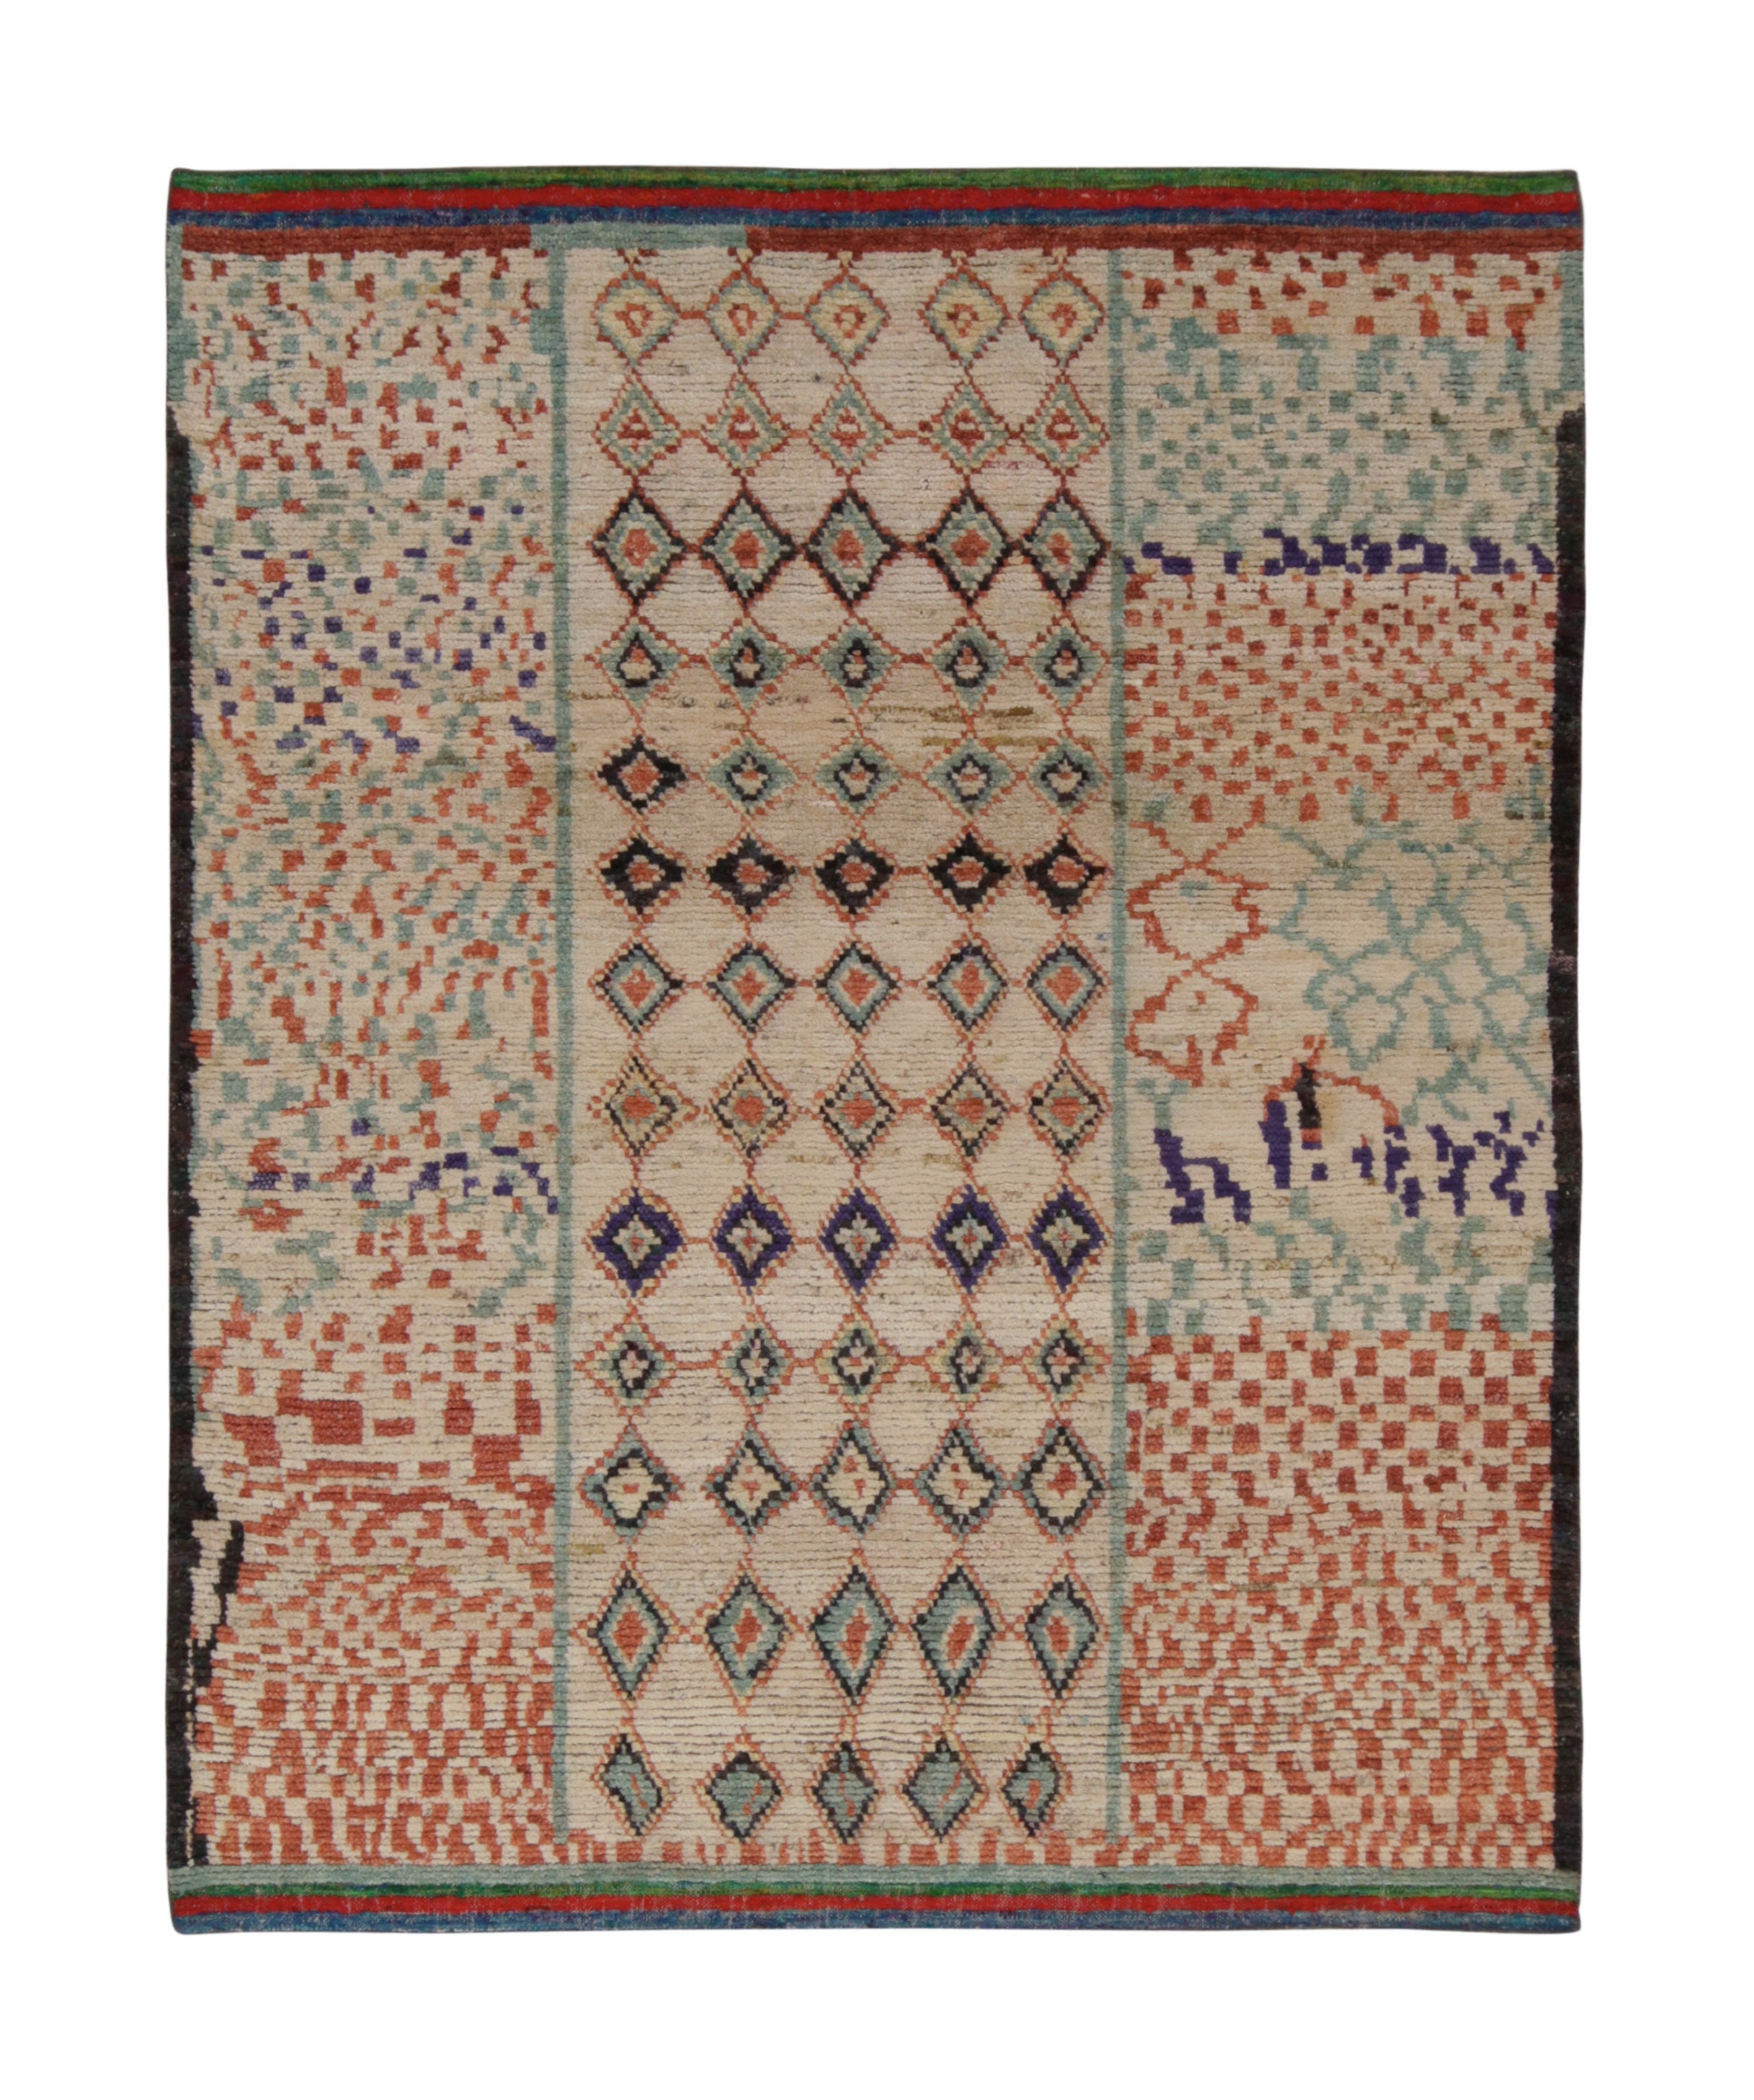 Rug & Kilim’s Moroccan Style Rug in Beige, Red and Blue Geometric Patterns For Sale